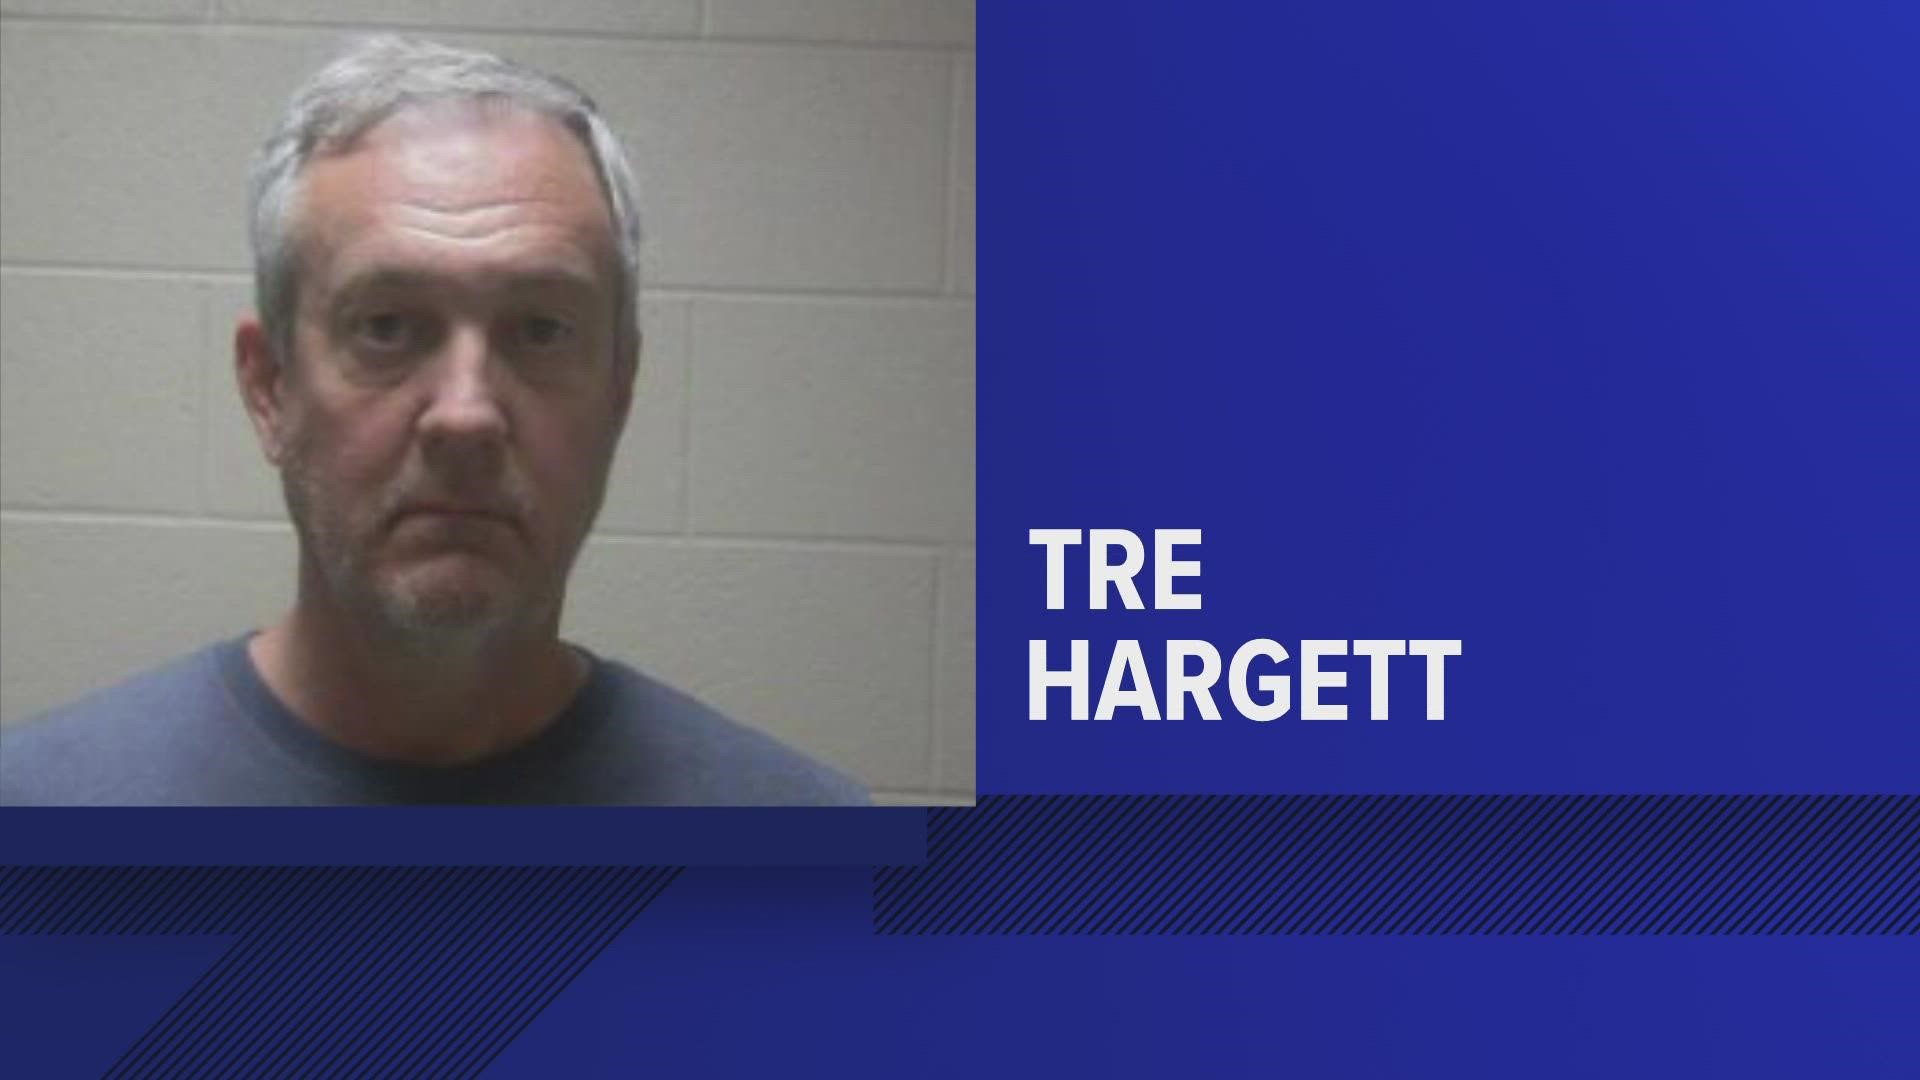 Booking records show Tre Hargett was booked into the Coffee County Jail shortly after midnight Saturday and later posted a $2,000 bail.